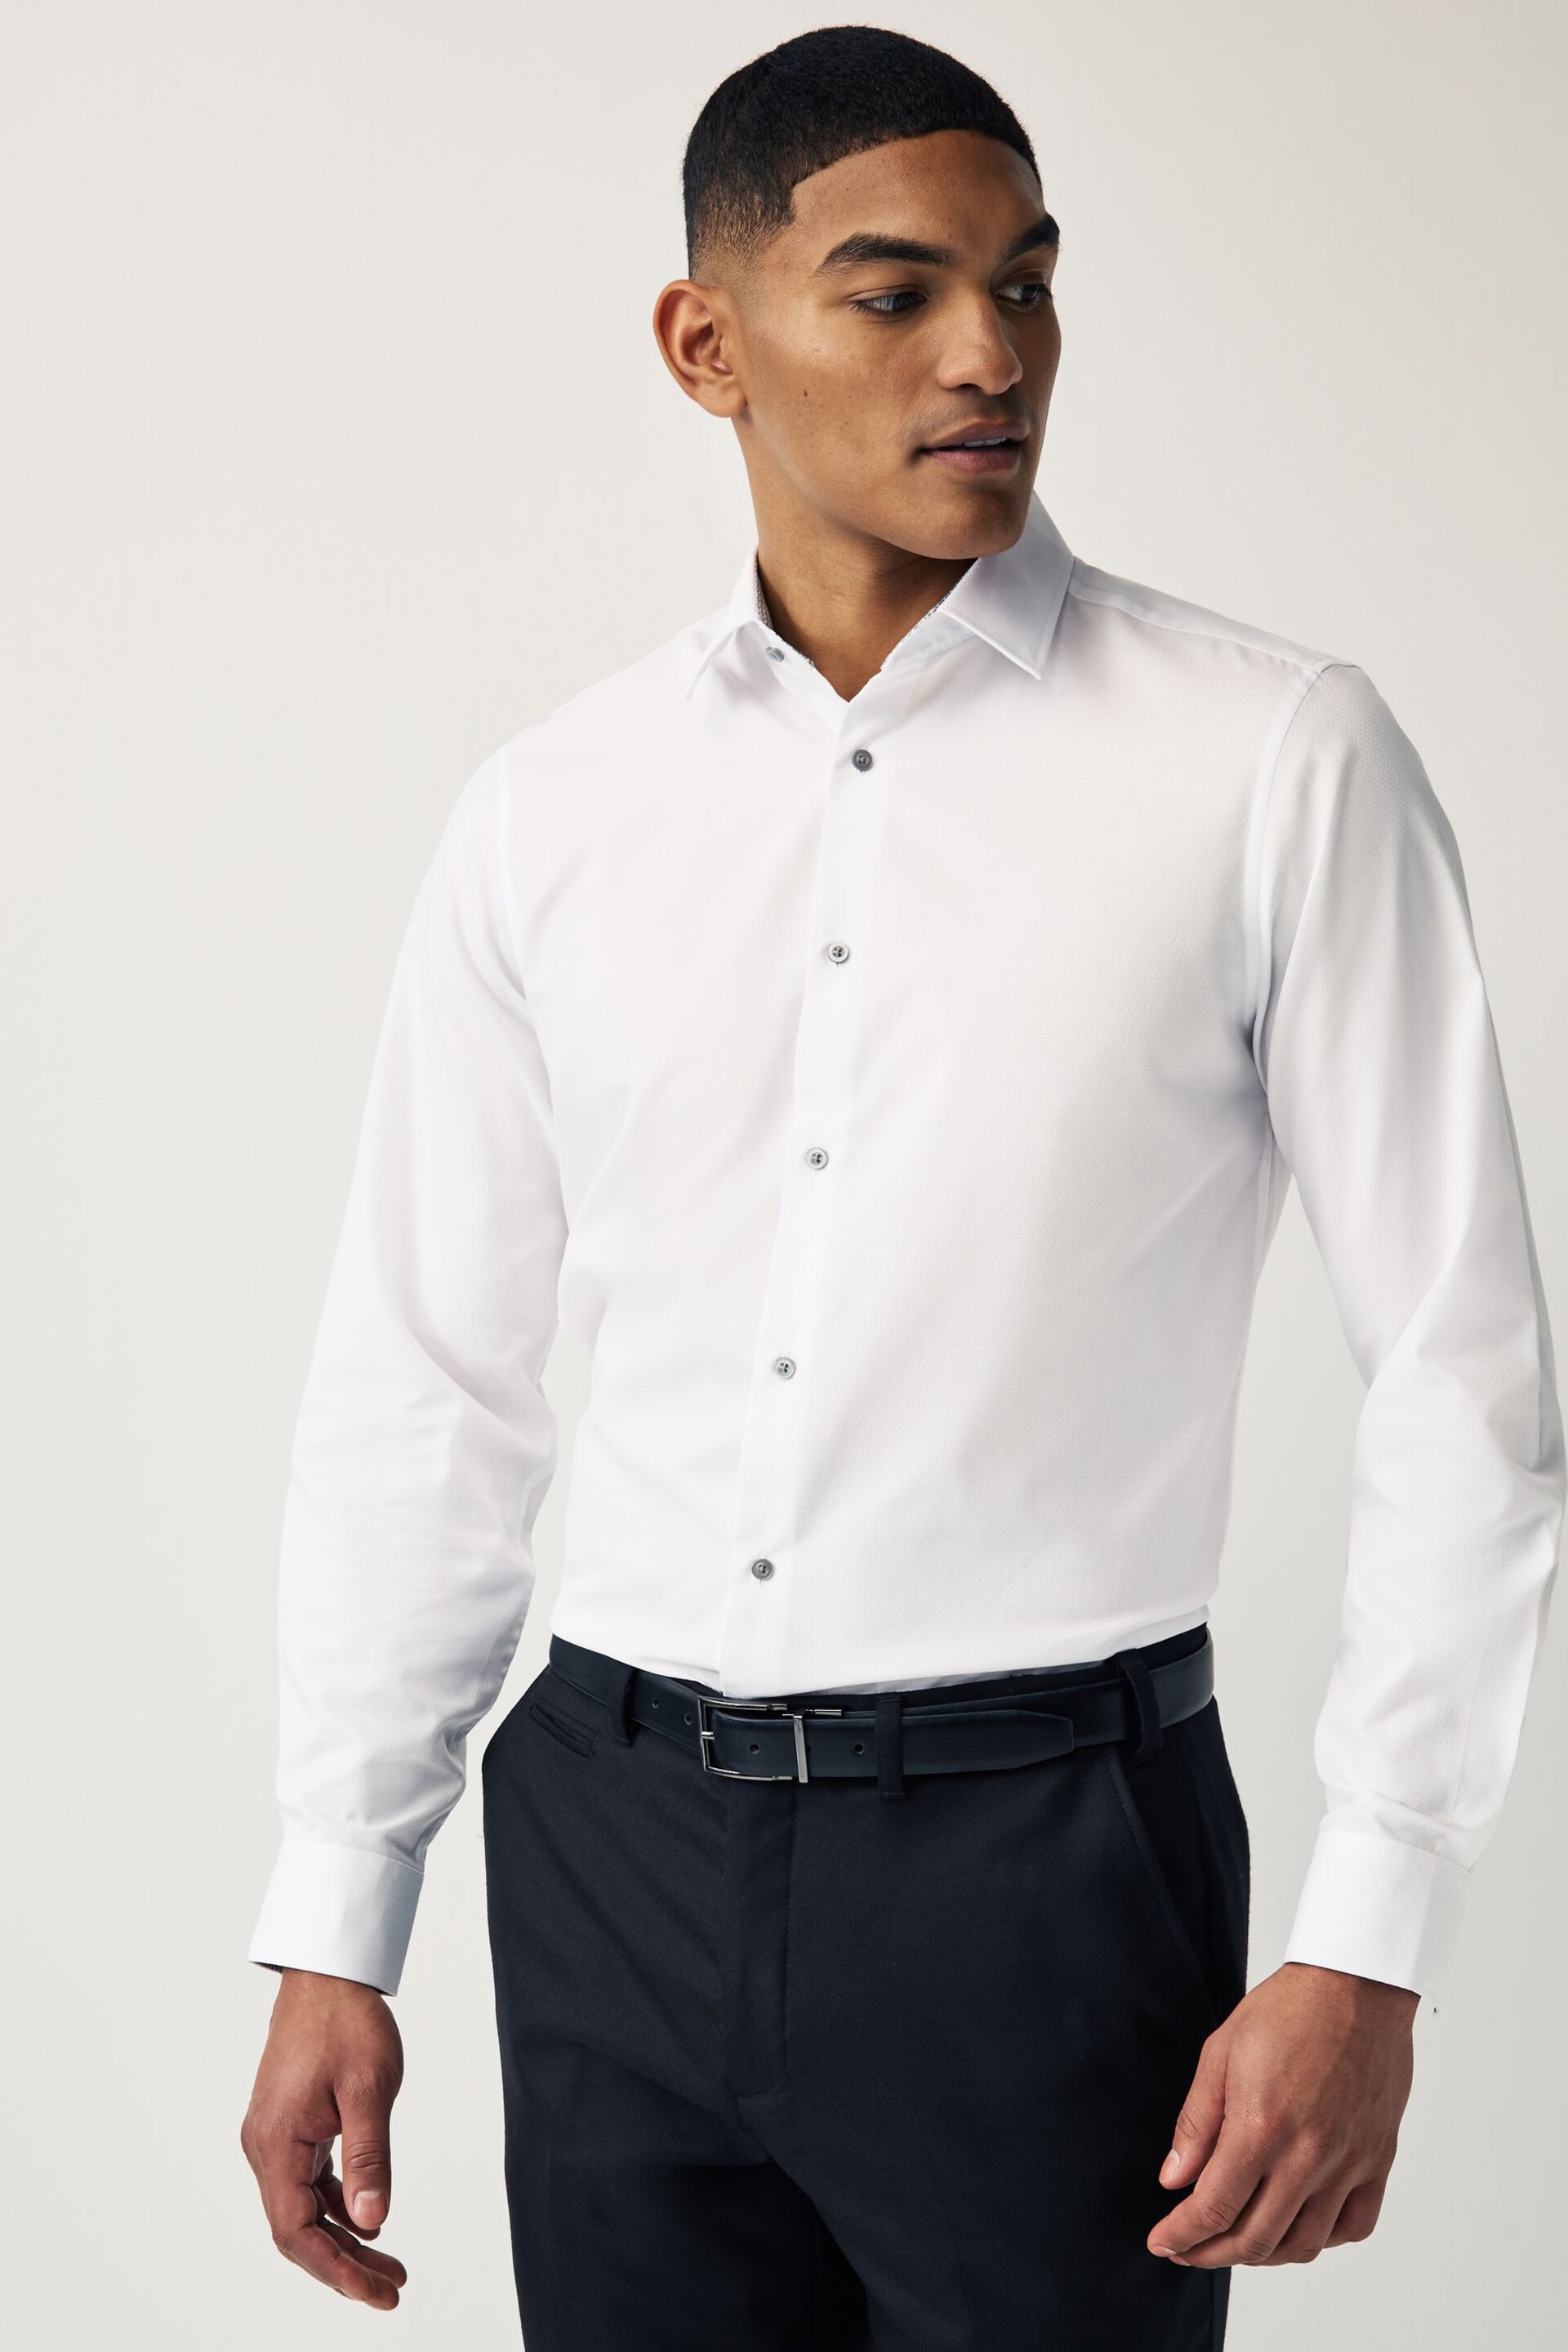 White Regular Fit Trimmed Easy Care Single Cuff Shirt - Image 1 of 4